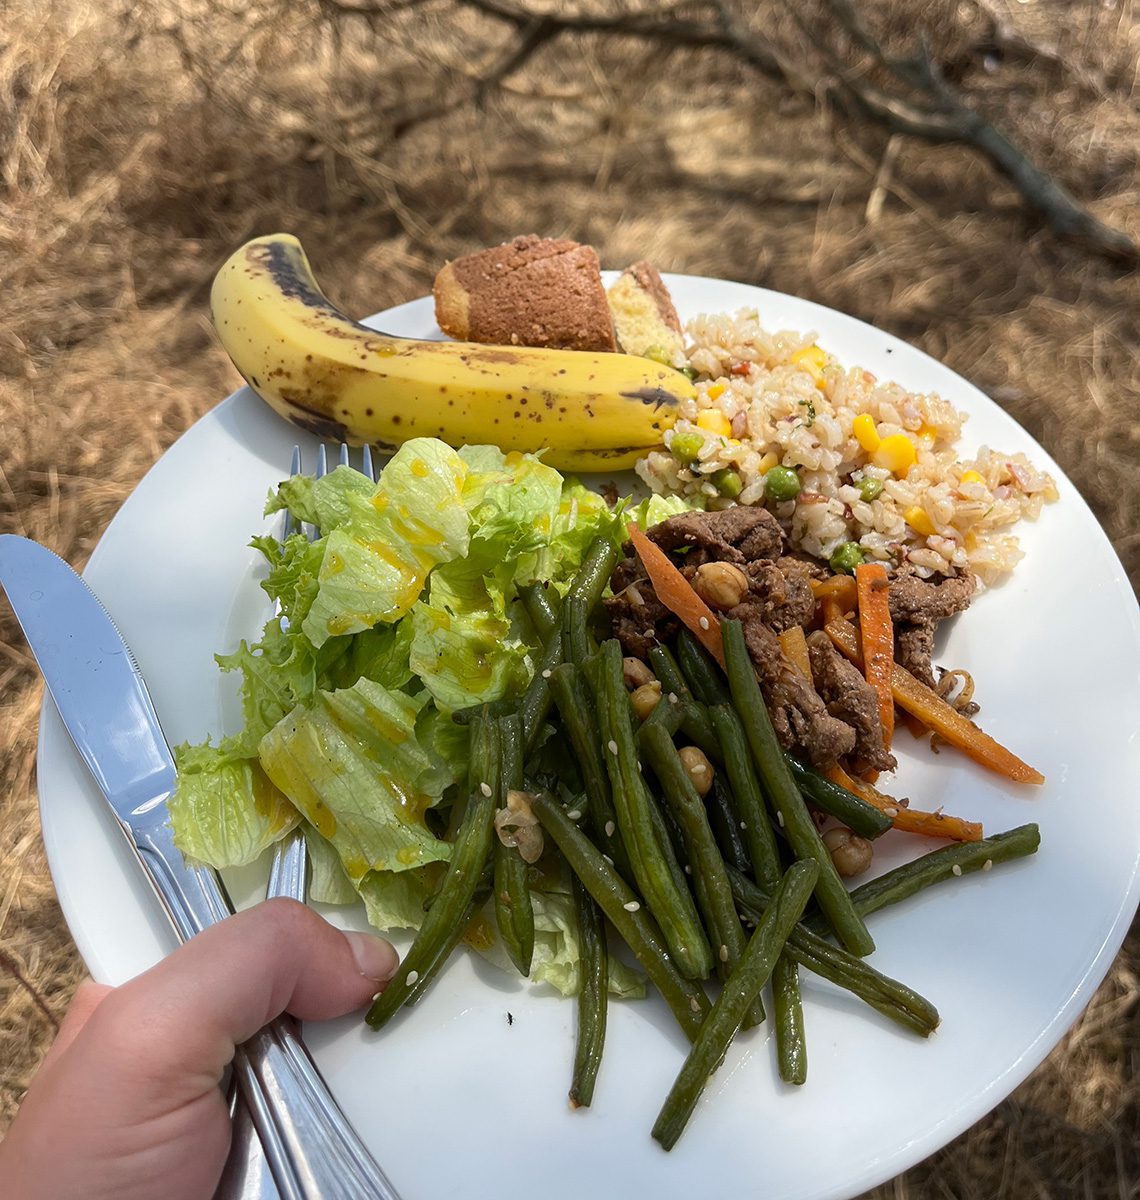 bush lunch served by thomson safaris guides